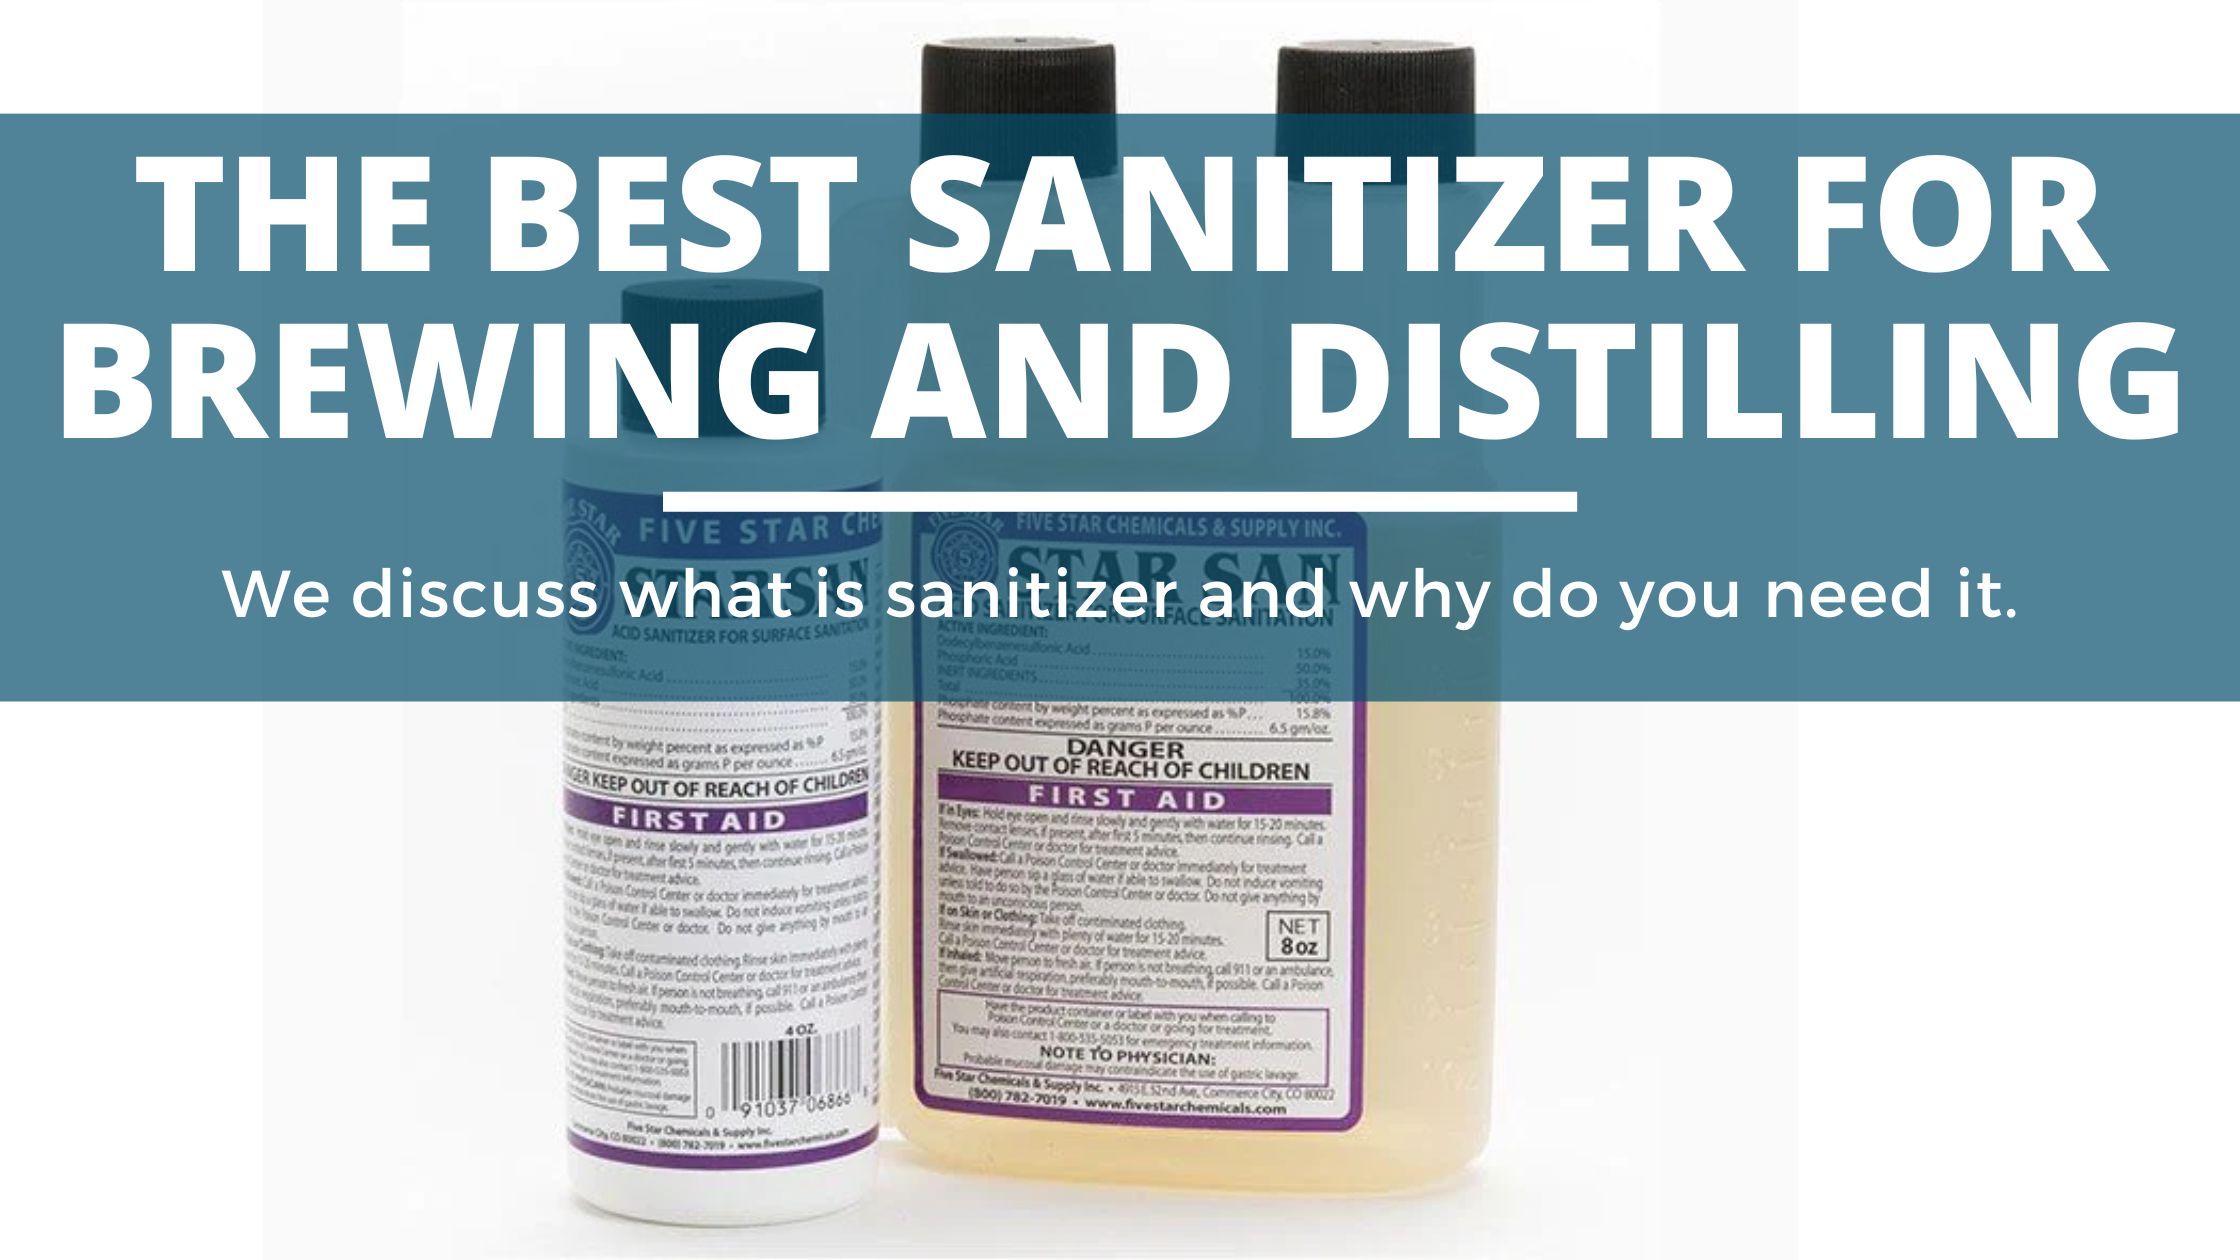 Image of diy distilling the best sanitizer for brewing and home distilling